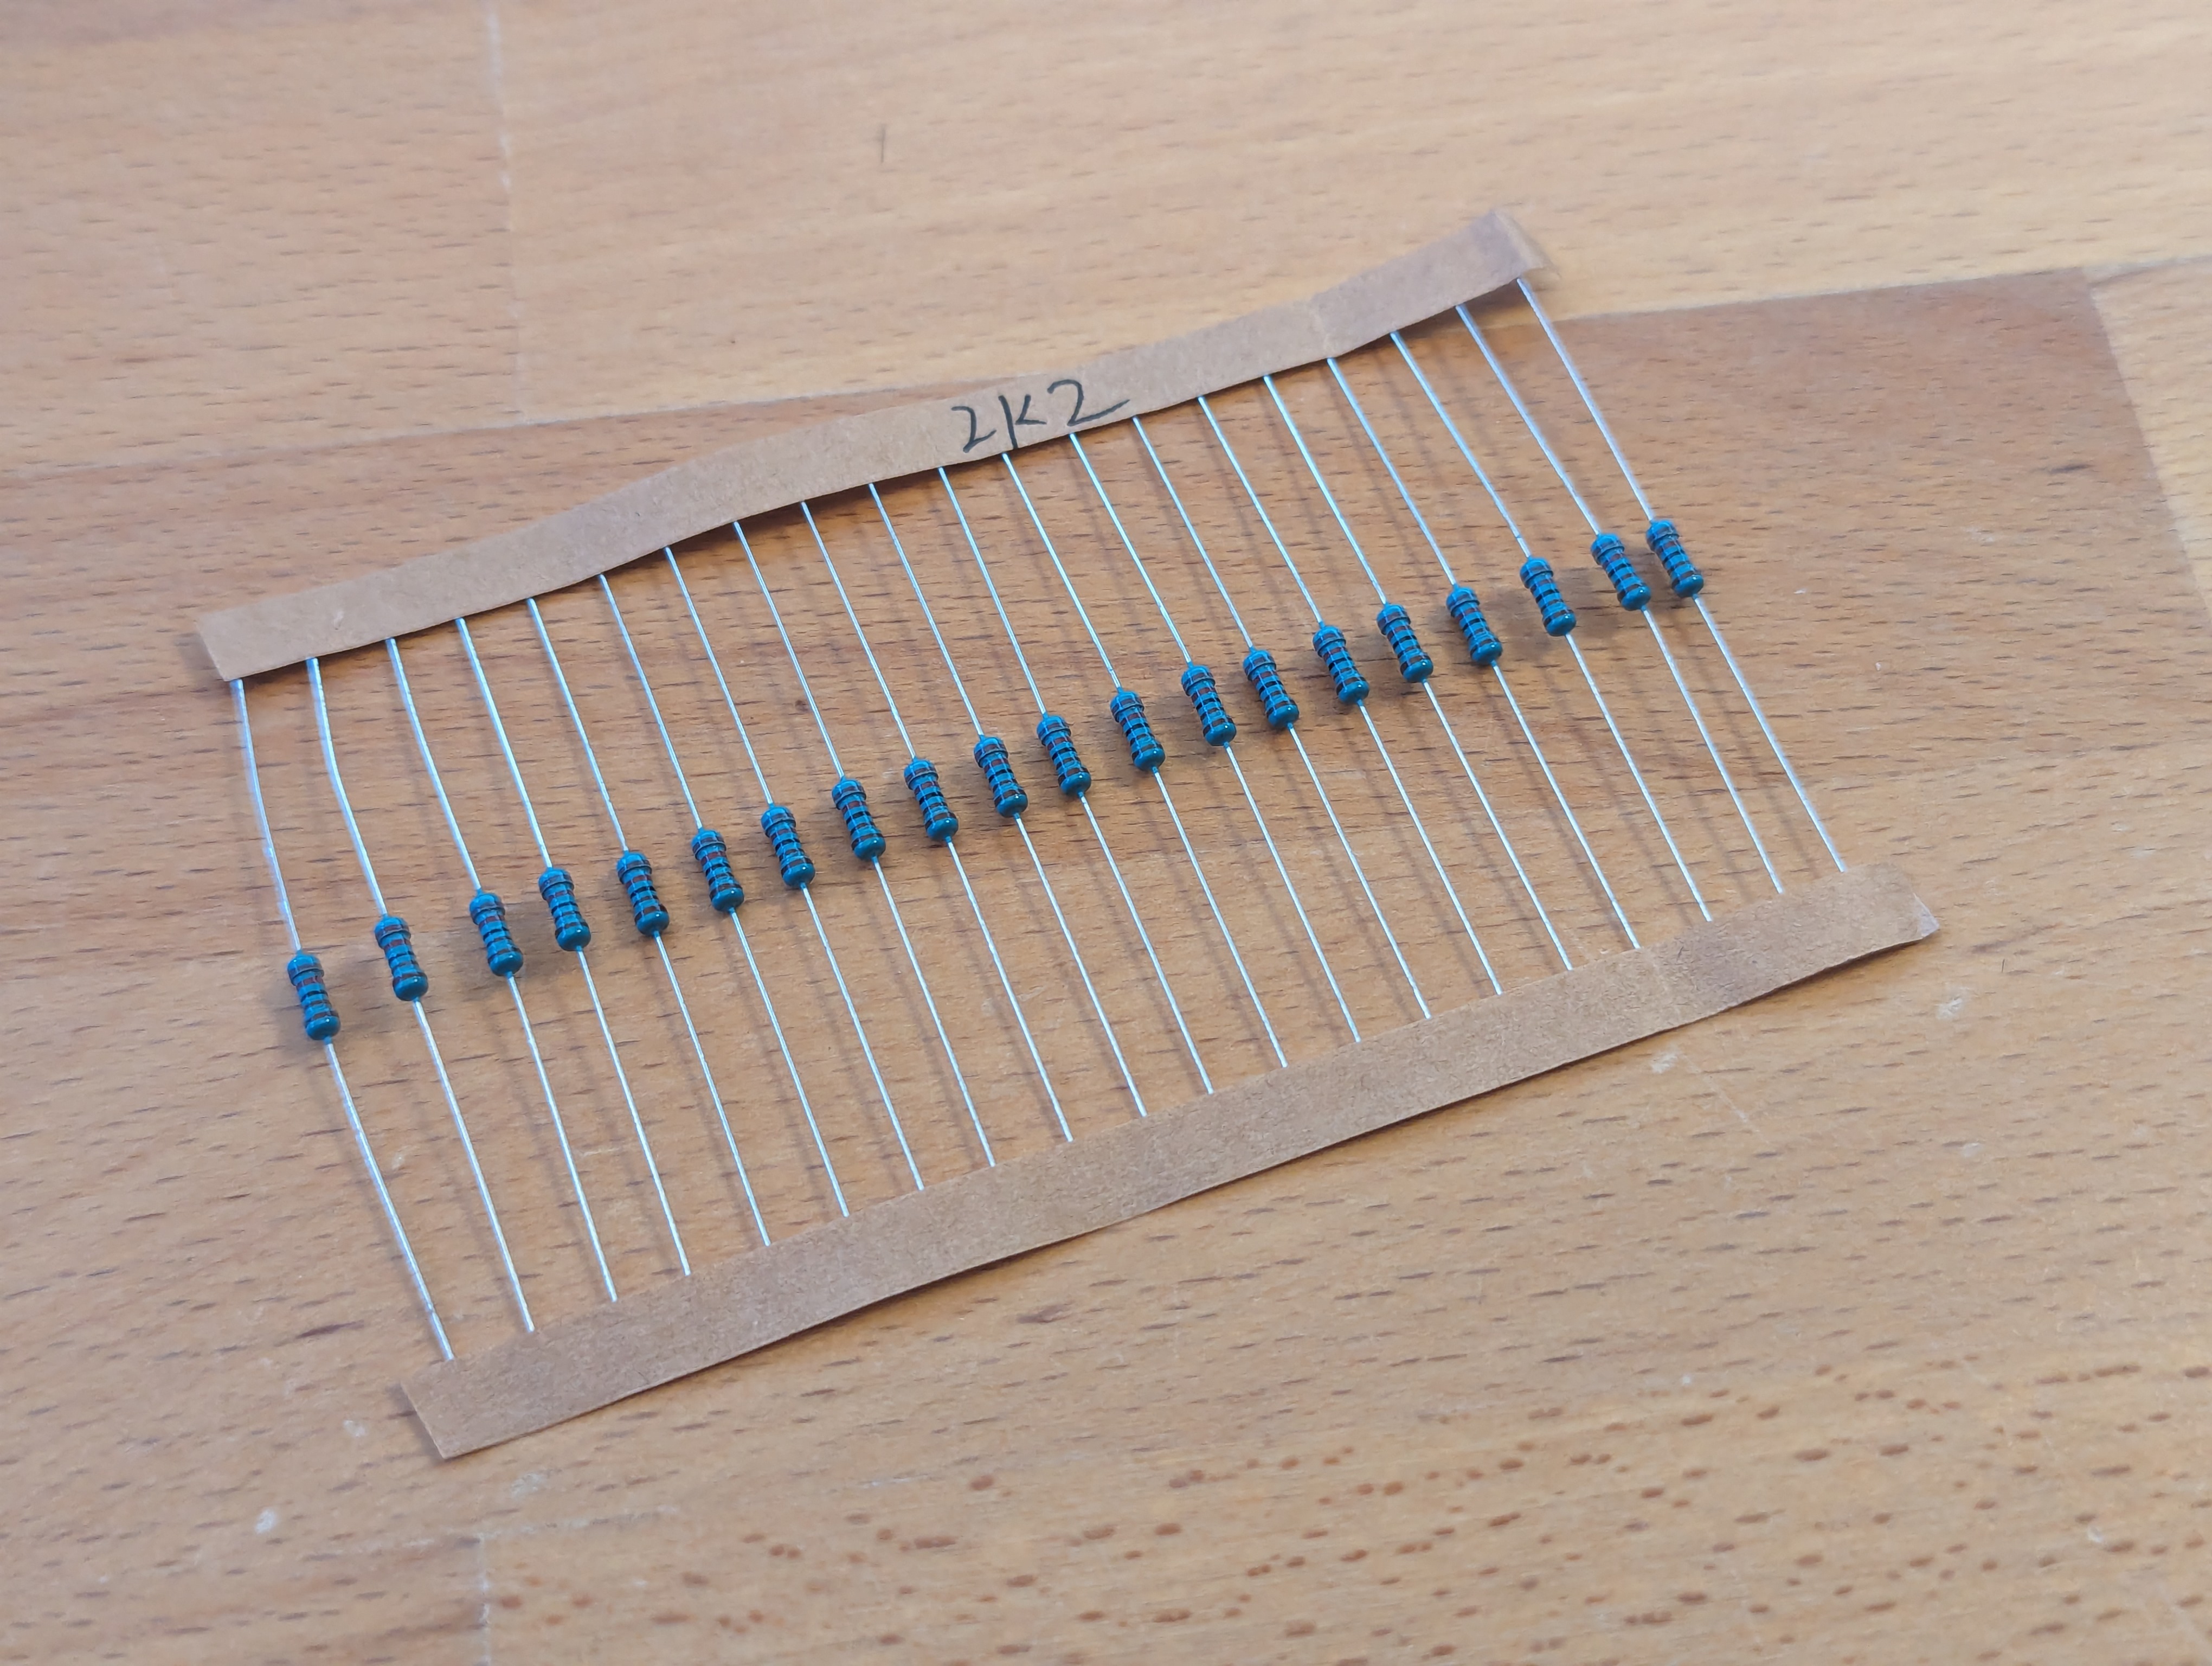 Resistor assortment 0.25W metal layer - 600 pieces with 30 different values